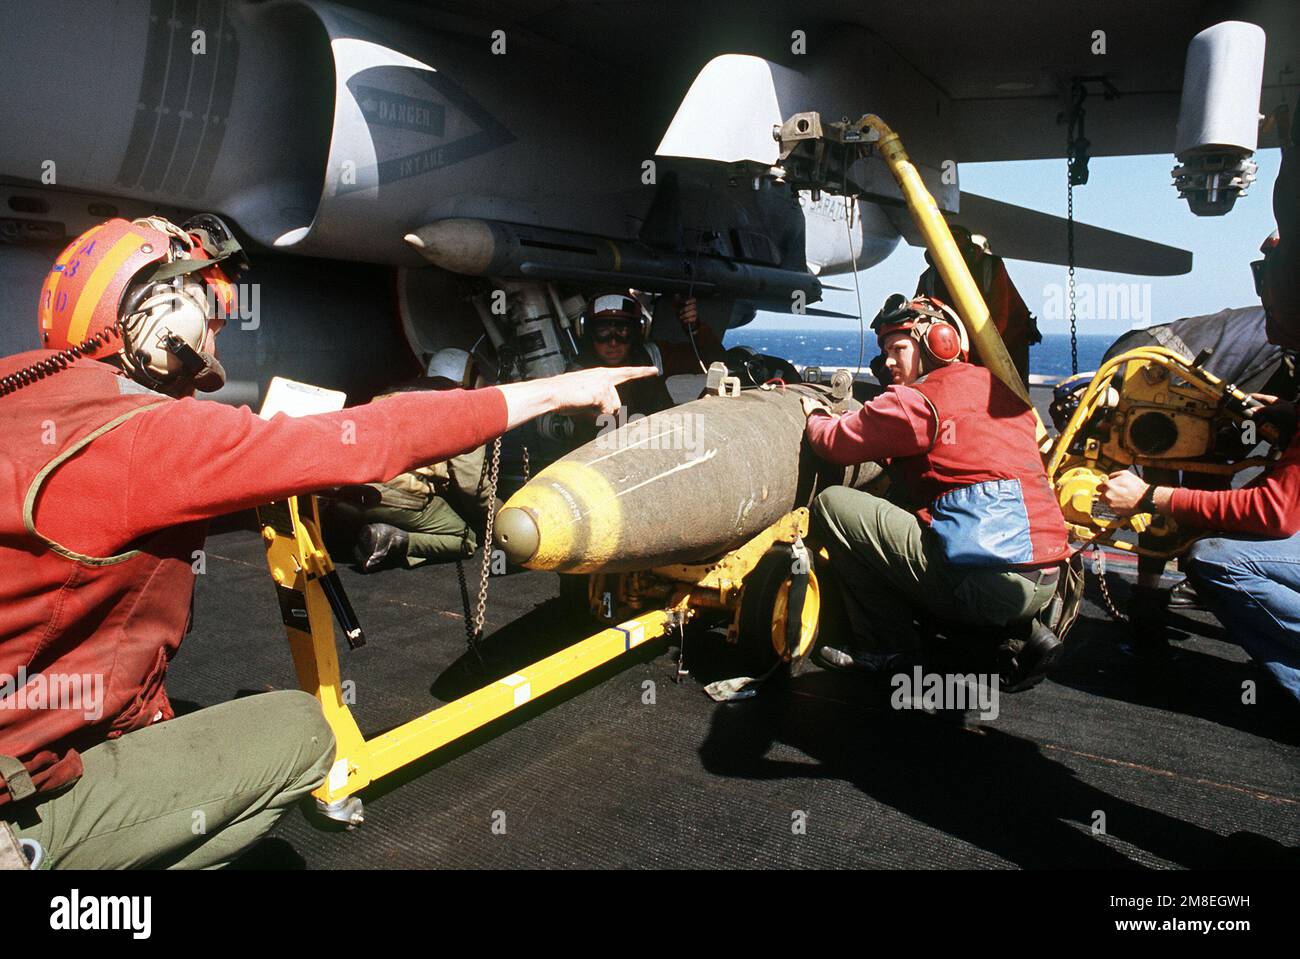 Ordnancemen prepare to upload a bomb on an F/A-18 Hornet aircraft during Operation Desert Storm. Subject Operation/Series: DESERT STORM Country: Unknown Stock Photo